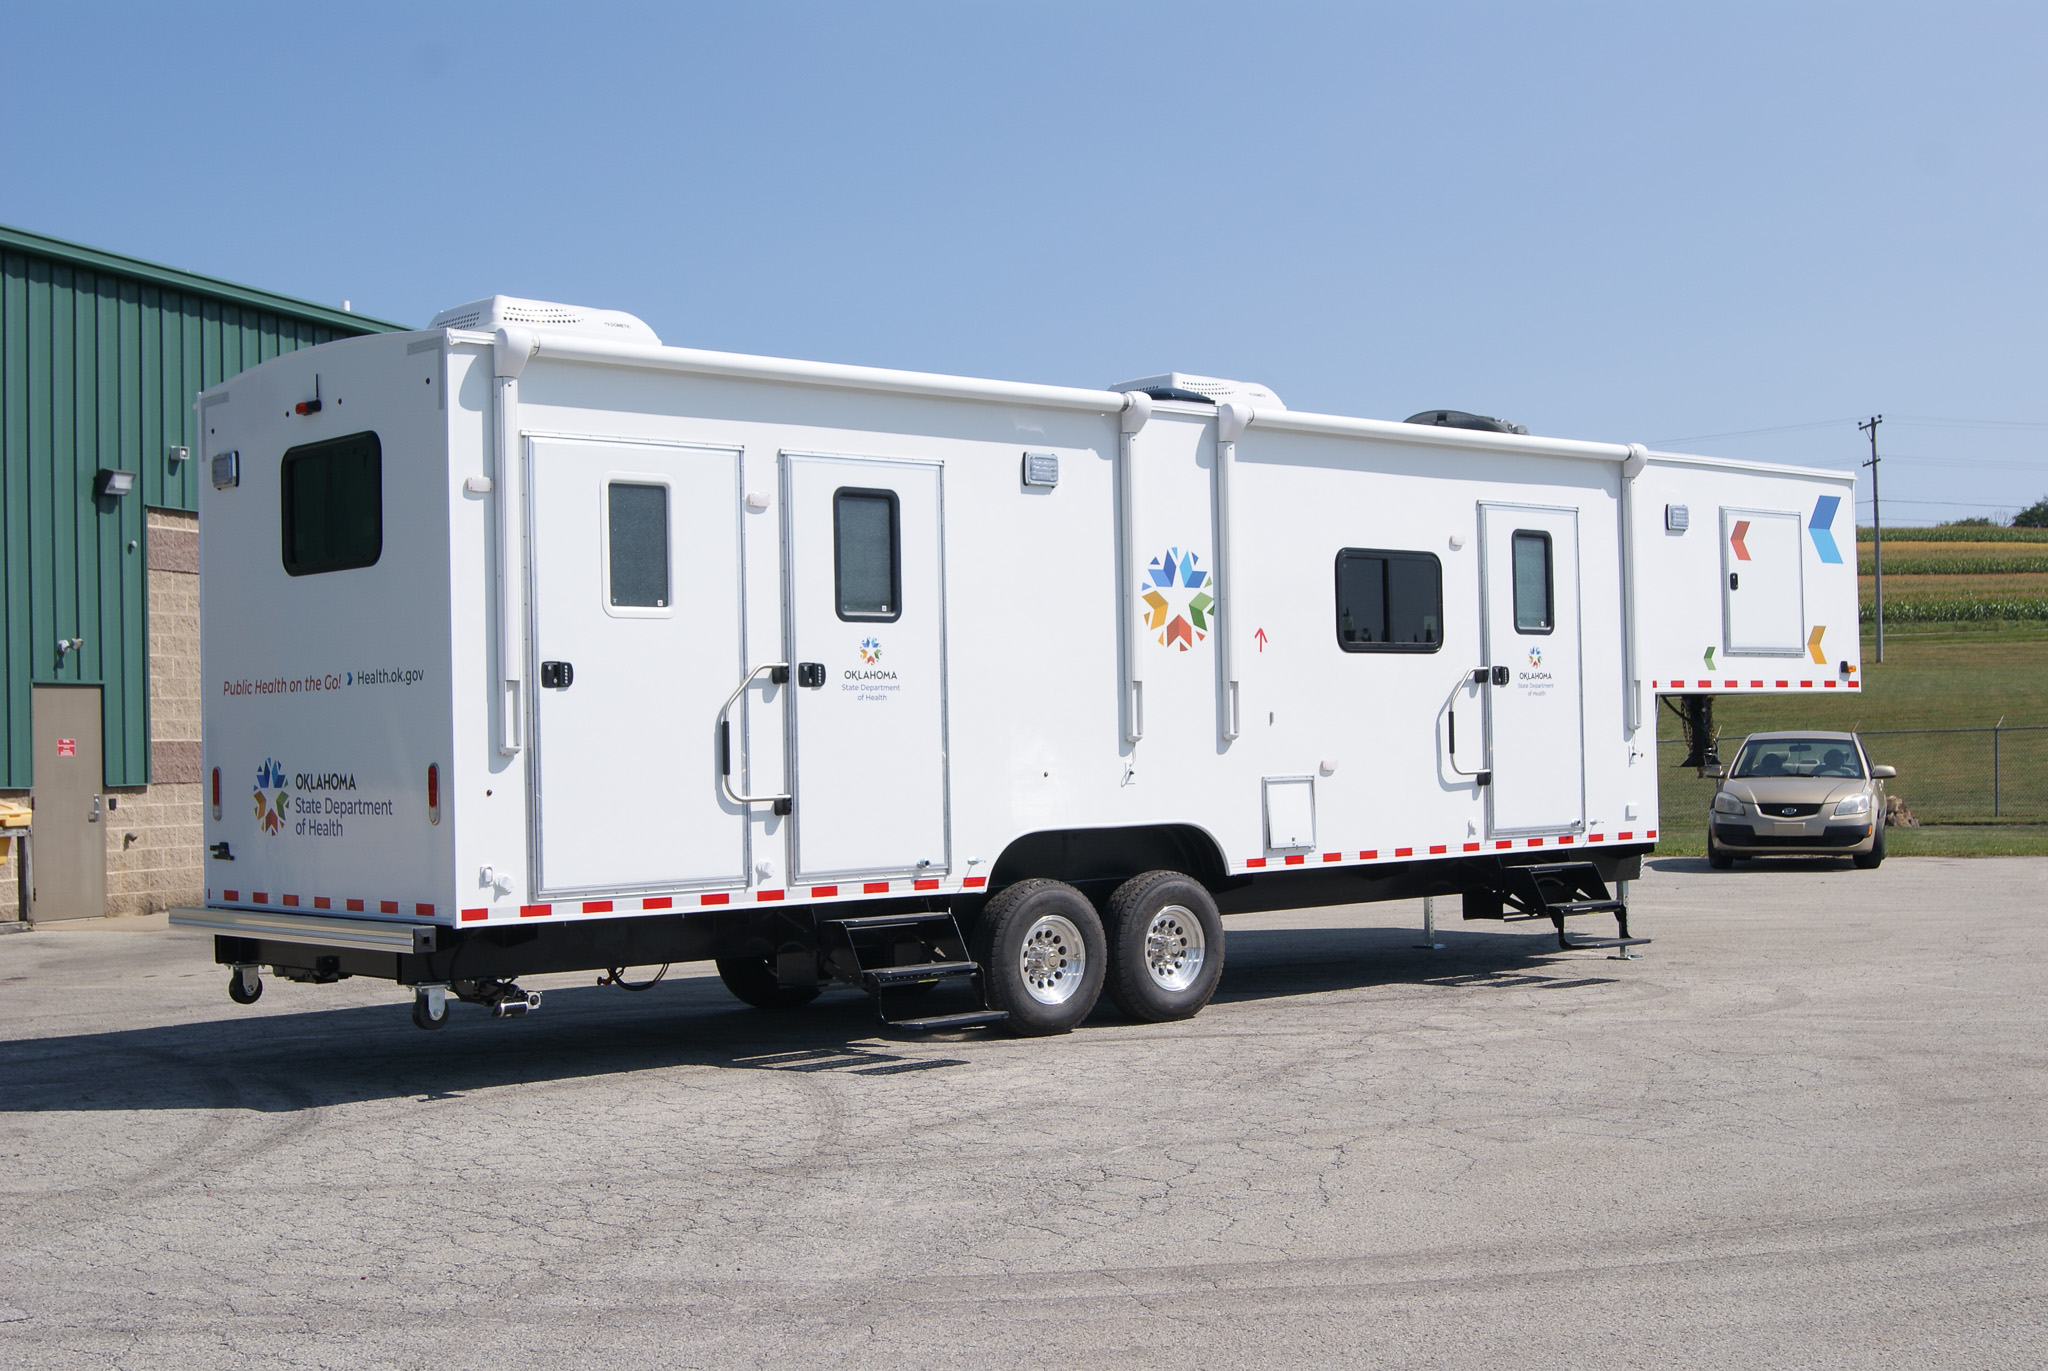 An exterior view of the unit made for the OK State Department of Health.